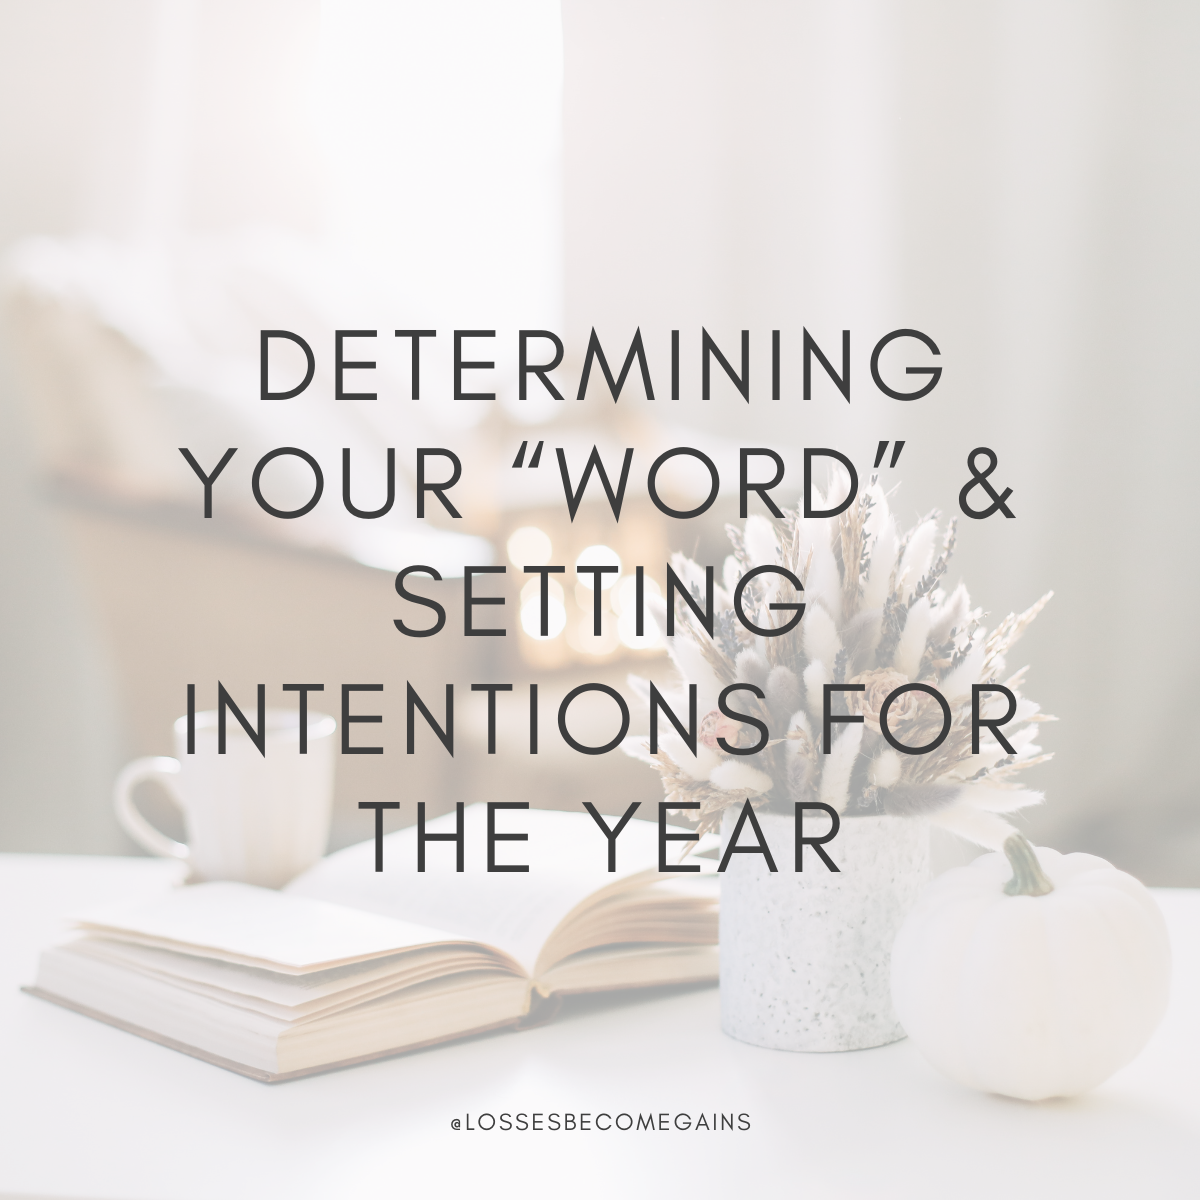 Determining Your "Word" & Setting Intentions for the Year by Losses Become Gains